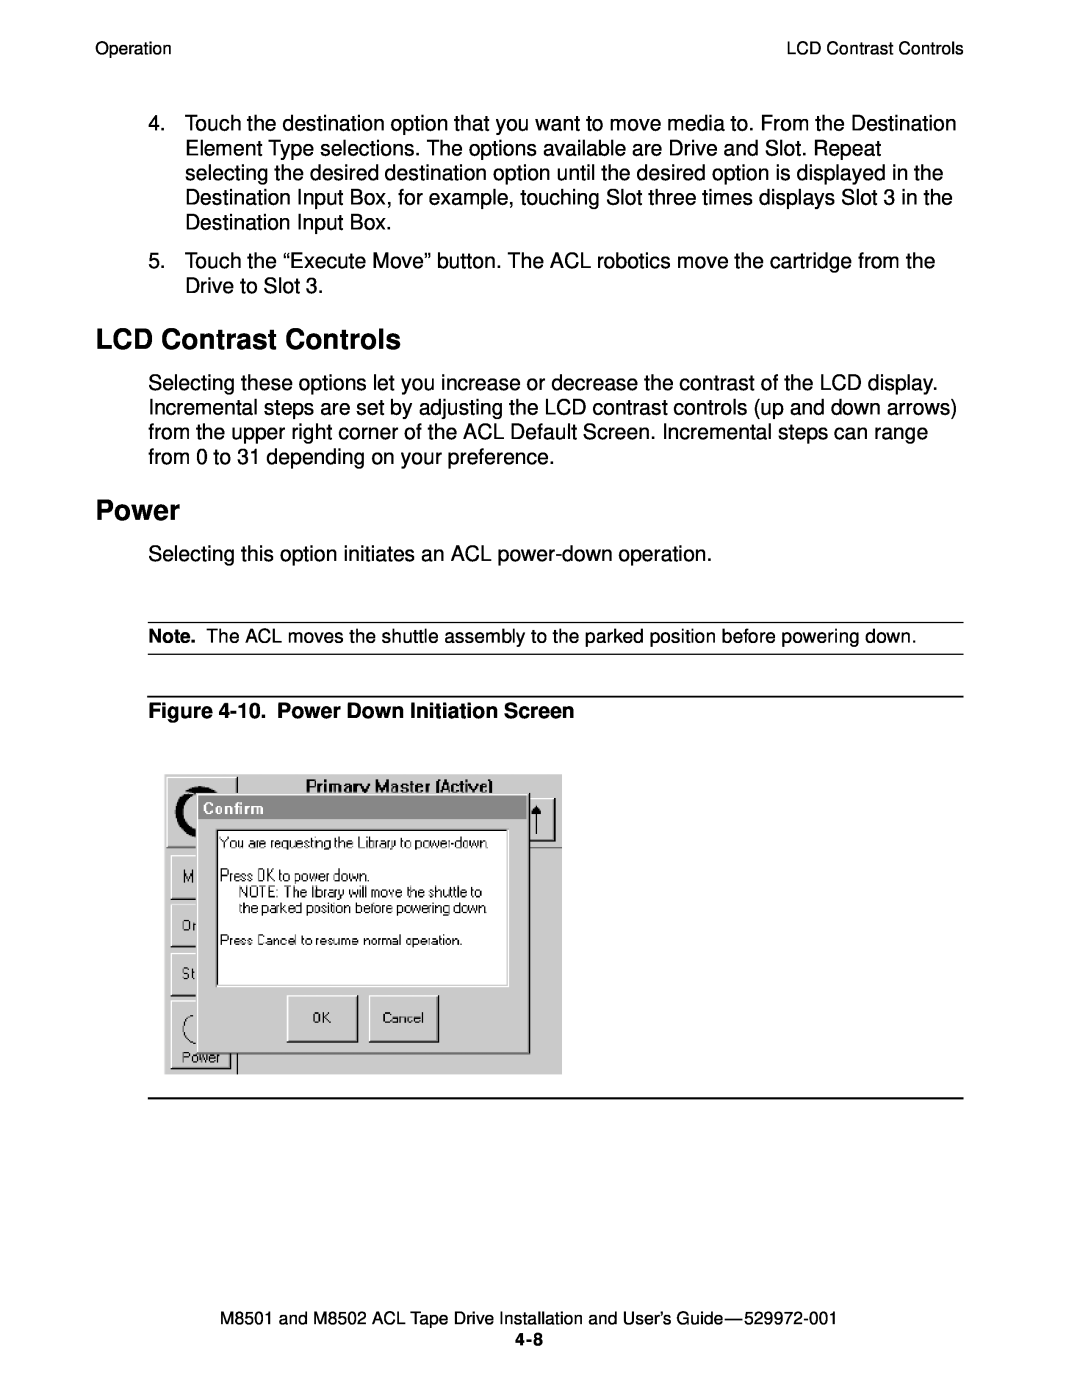 SMC Networks M8501 manual LCD Contrast Controls, 10. Power Down Initiation Screen 